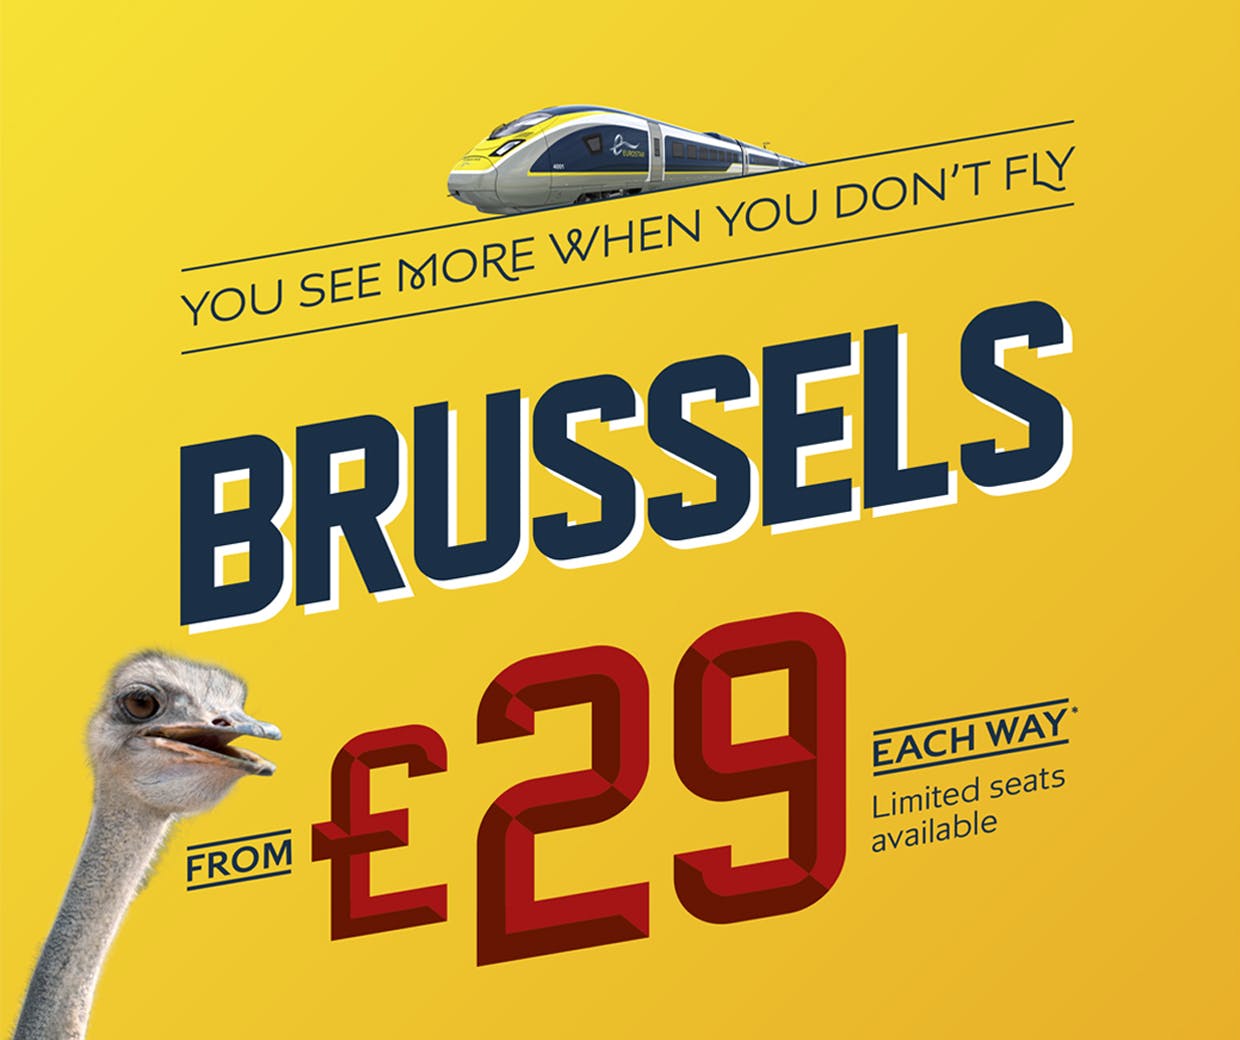 Eurostar looks to stand out from 'generic' travel ads with new campaign